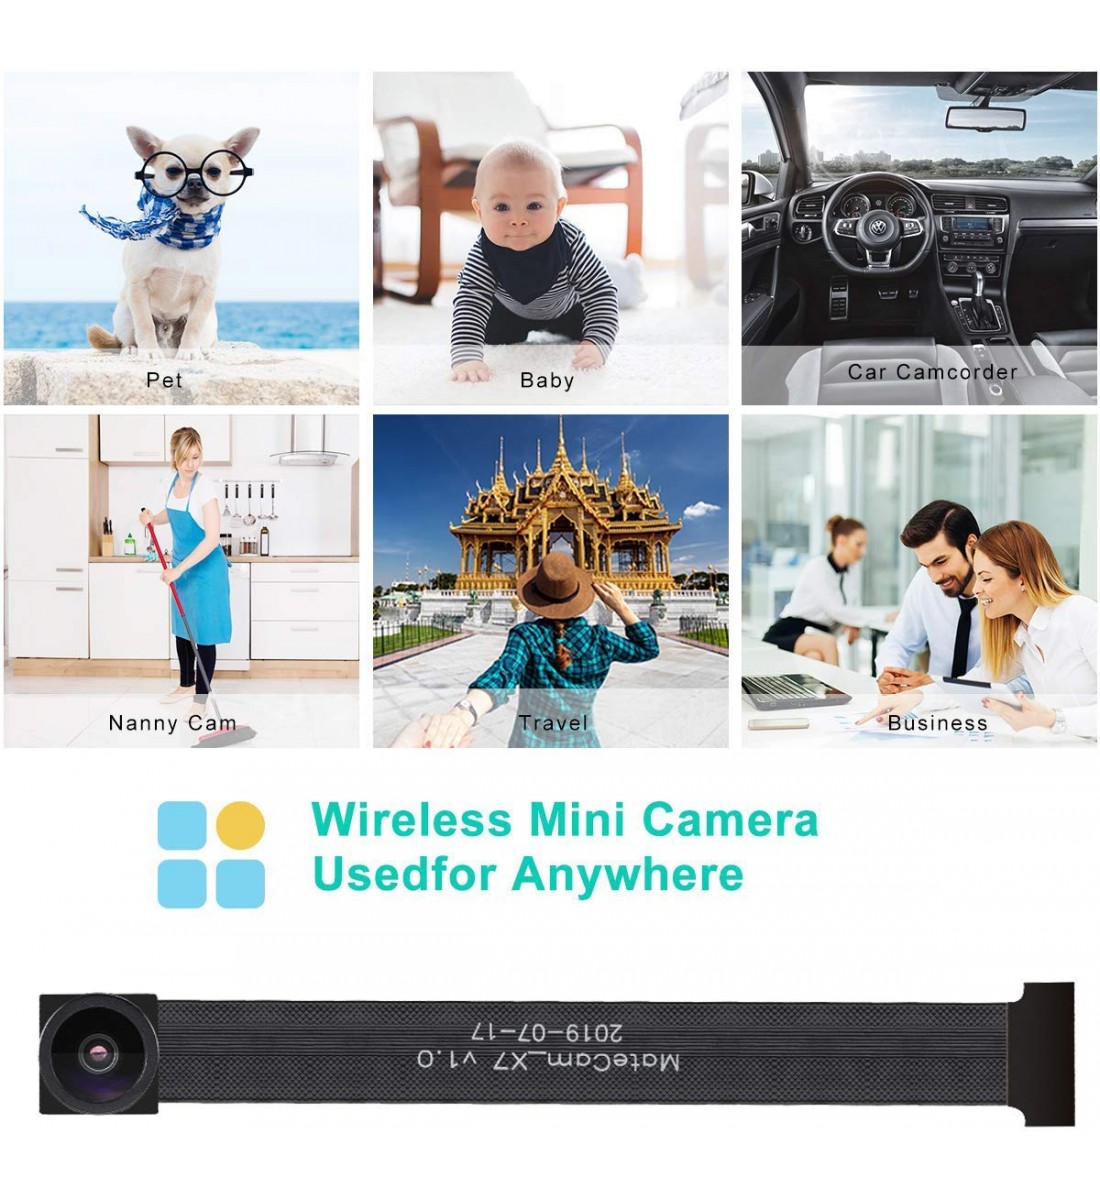 4K Ultra HD DIY Wireless Camera 120 Degree Mini DVR Motion Detection Nanny Cam Security System APP Control Action Camera up to 256GB (2)